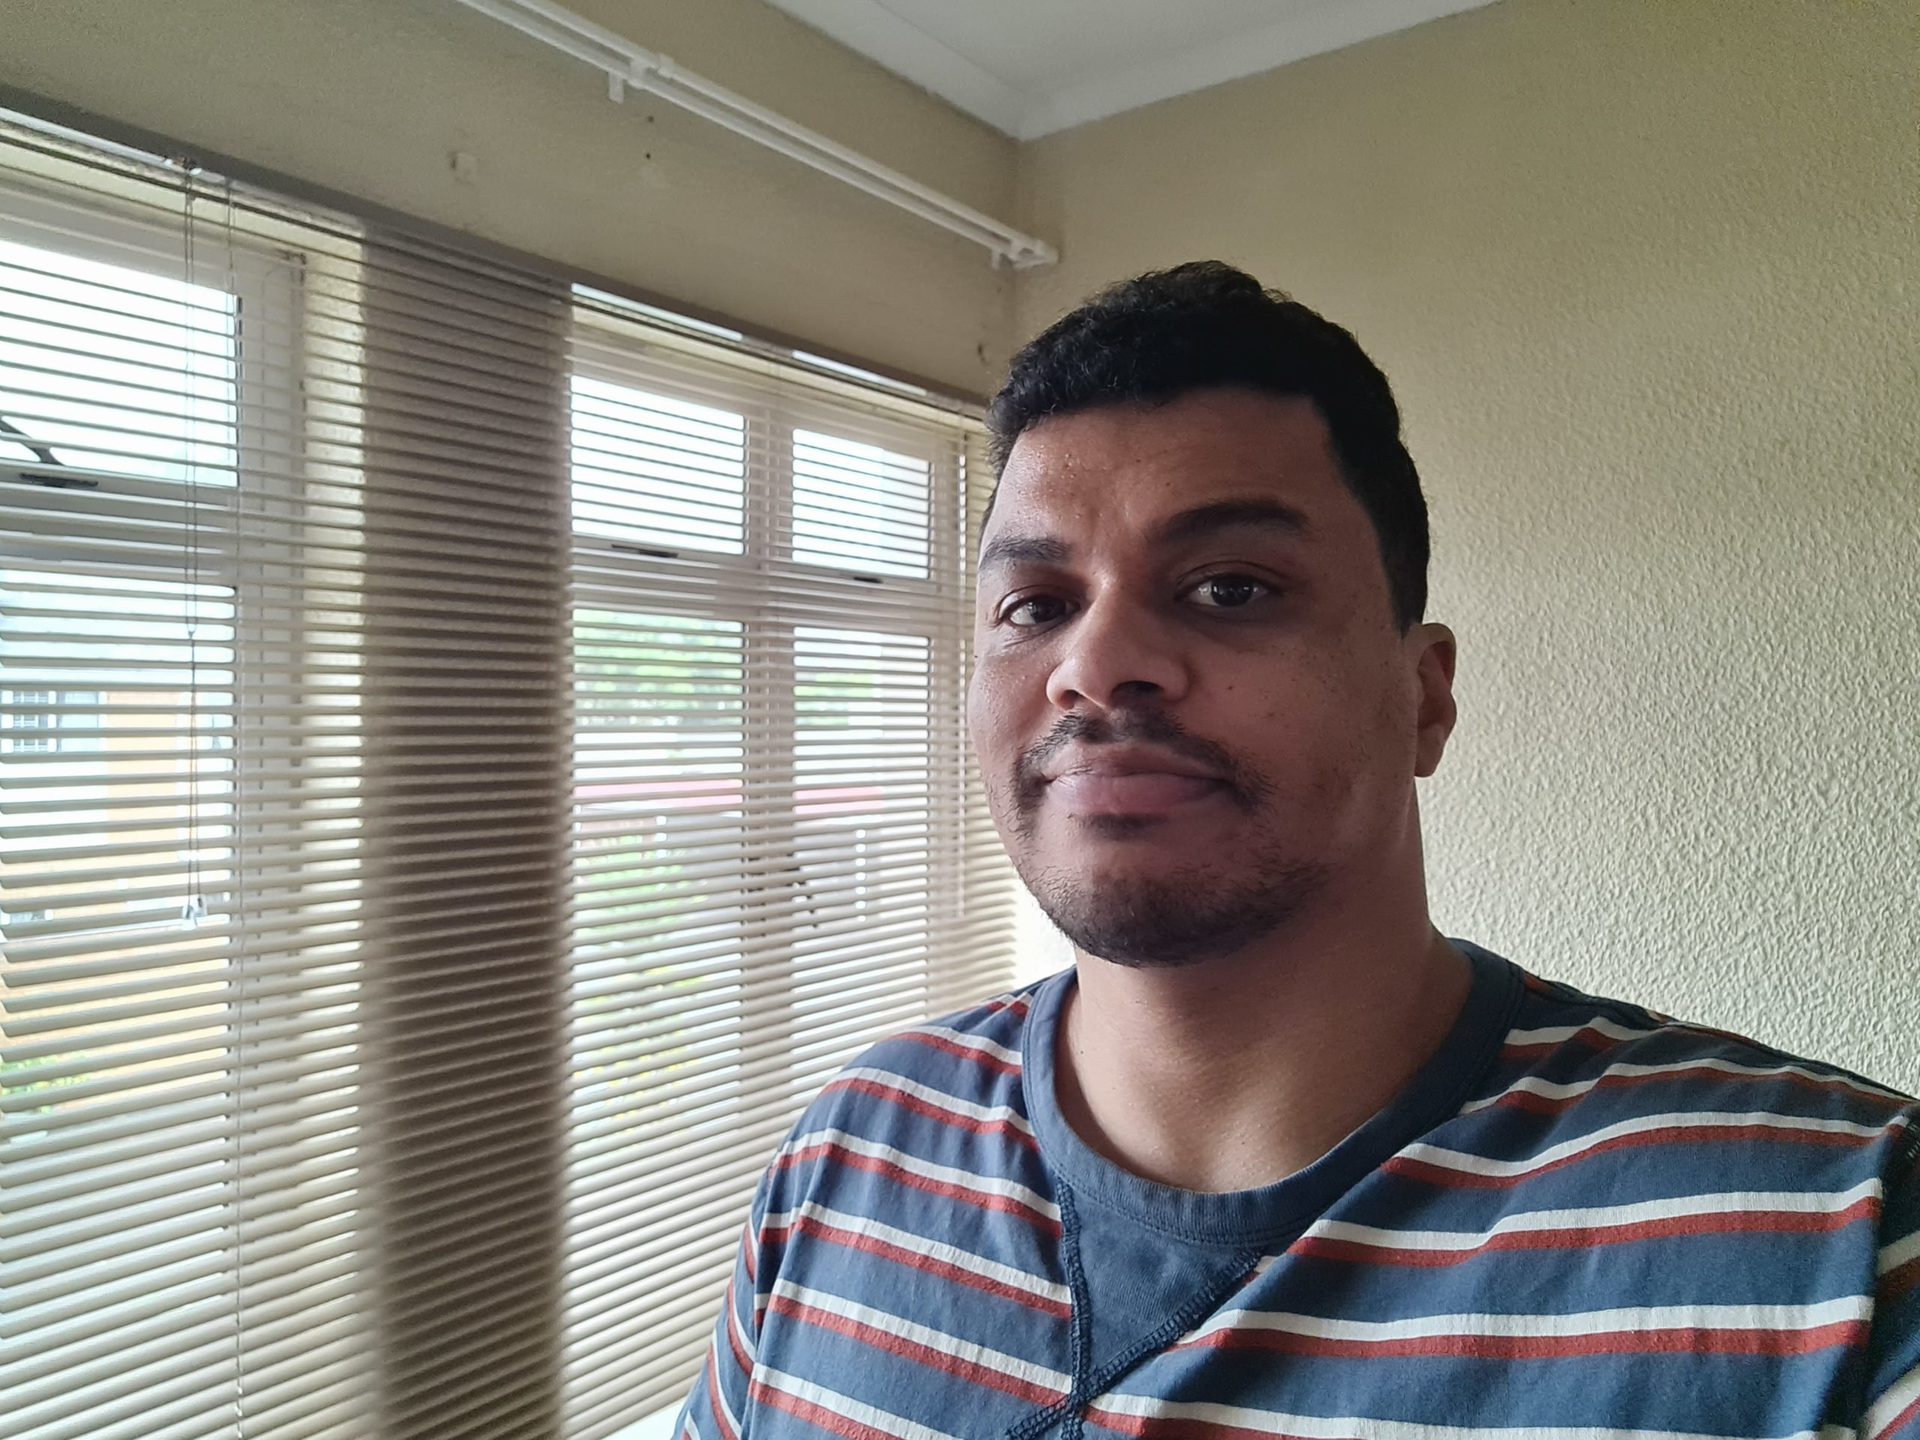 Galaxy S20 FE indoor selfie of a man with dark hair standing in front of a window and wearing a striped t-shirt